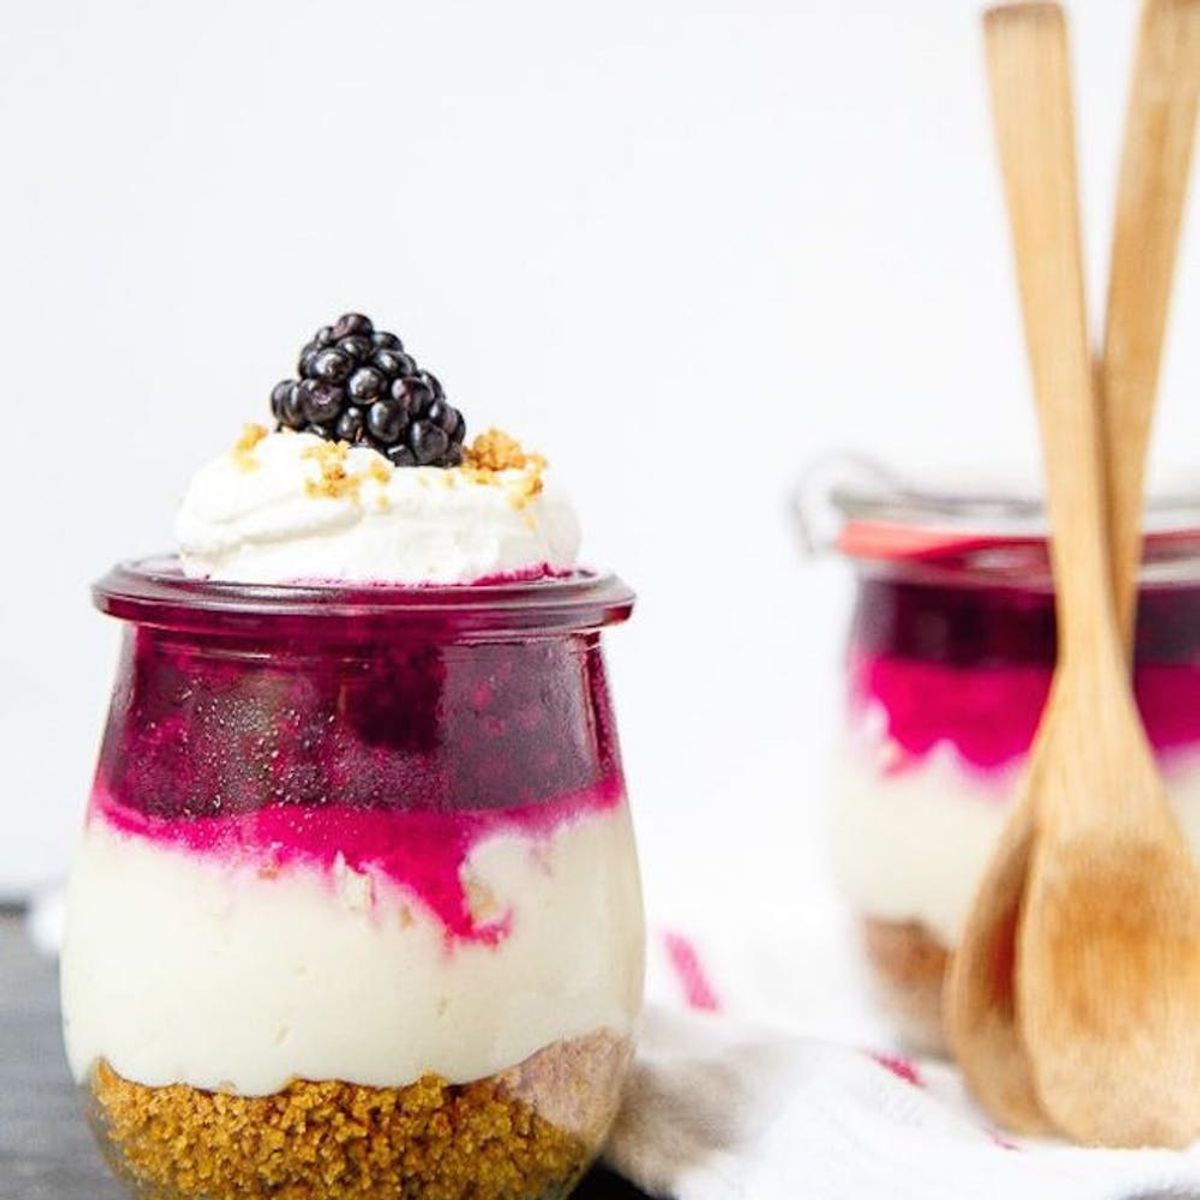 12 Simple No-Bake Dessert Recipes to Whip Up This Weekend